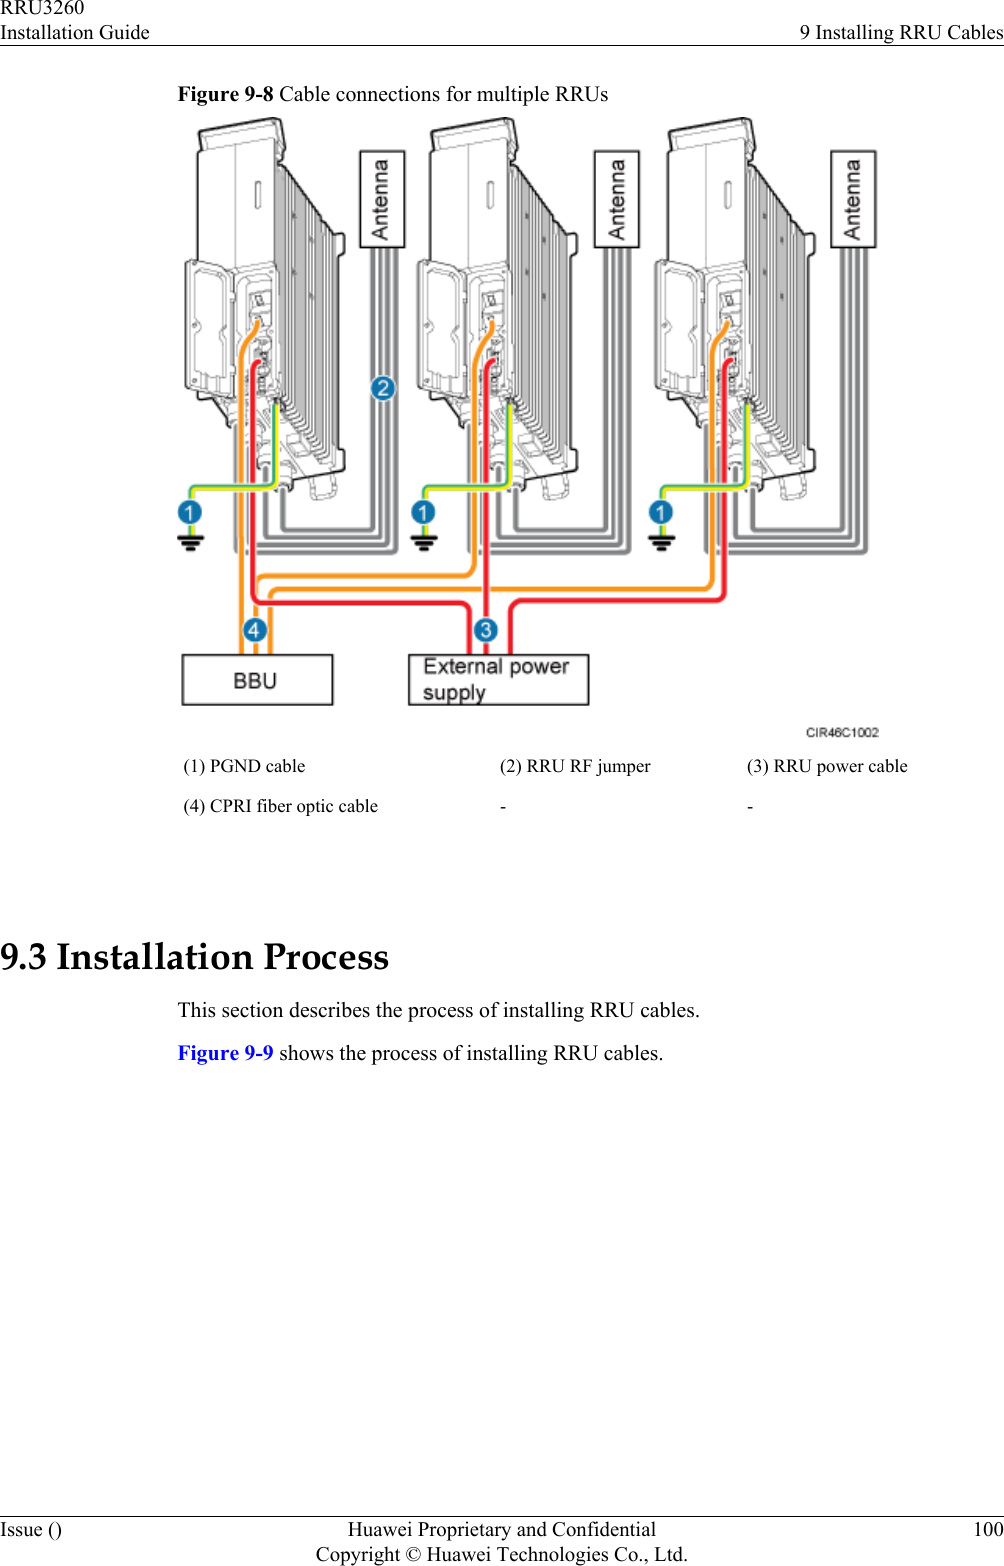 Figure 9-8 Cable connections for multiple RRUs(1) PGND cable (2) RRU RF jumper (3) RRU power cable(4) CPRI fiber optic cable - - 9.3 Installation ProcessThis section describes the process of installing RRU cables.Figure 9-9 shows the process of installing RRU cables.RRU3260Installation Guide 9 Installing RRU CablesIssue () Huawei Proprietary and ConfidentialCopyright © Huawei Technologies Co., Ltd.100